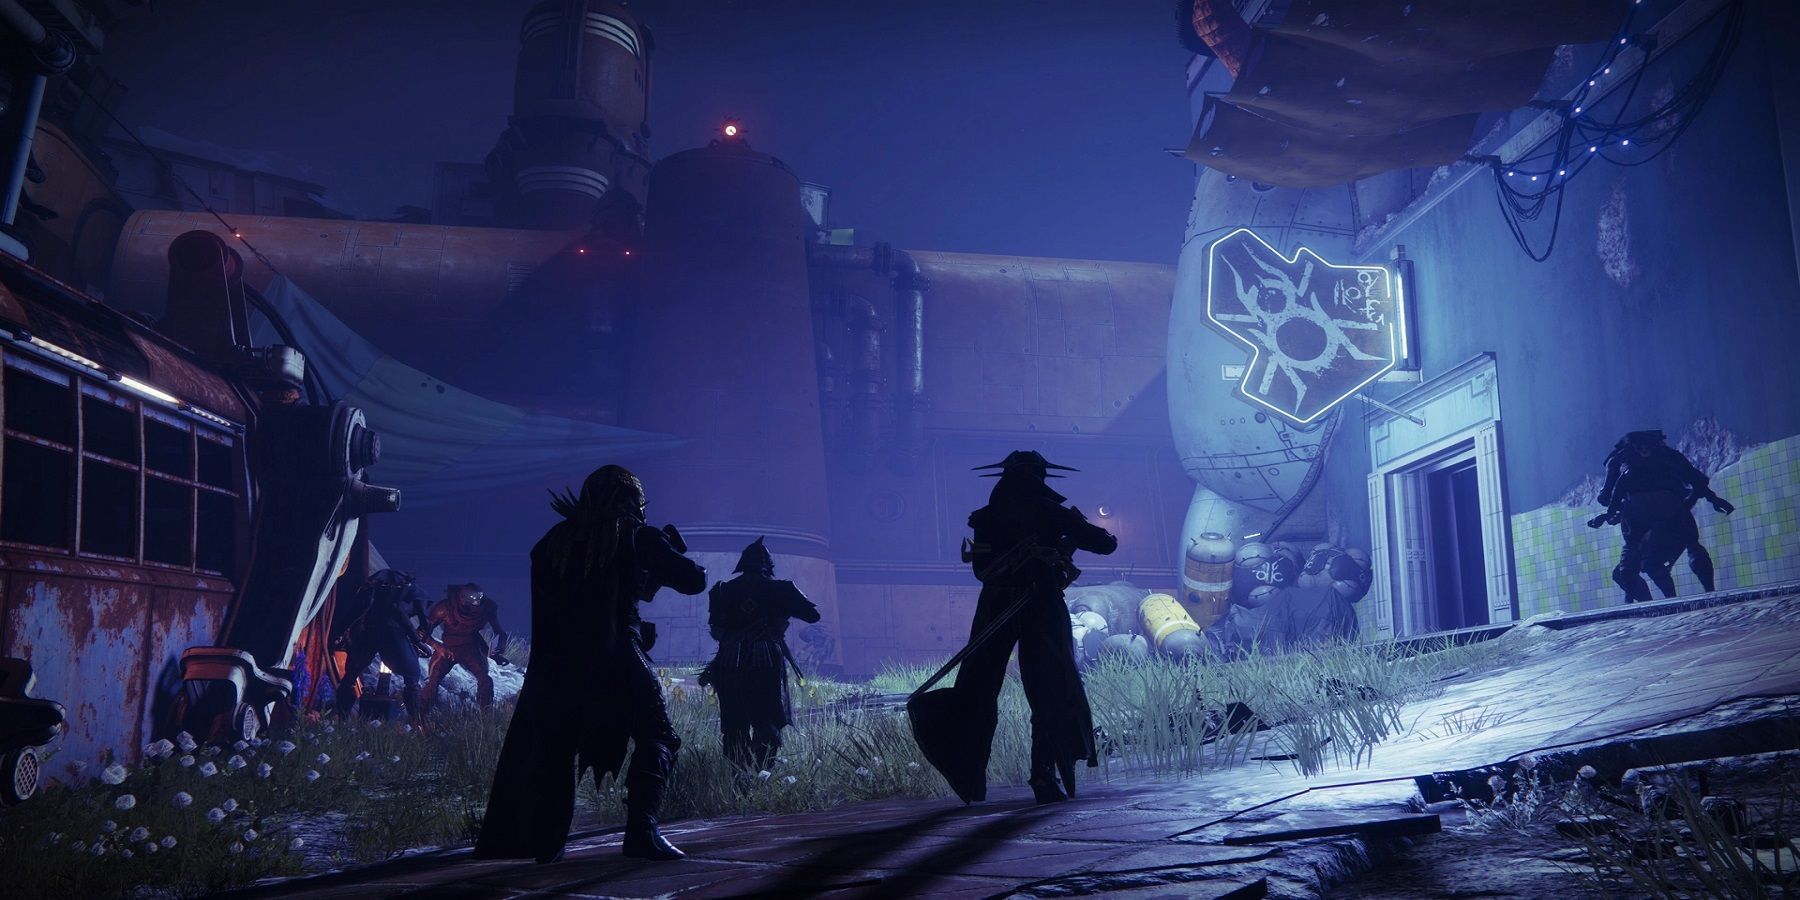 Destiny 2 Community Event Completed in 25 Hours Thanks to
Glitch